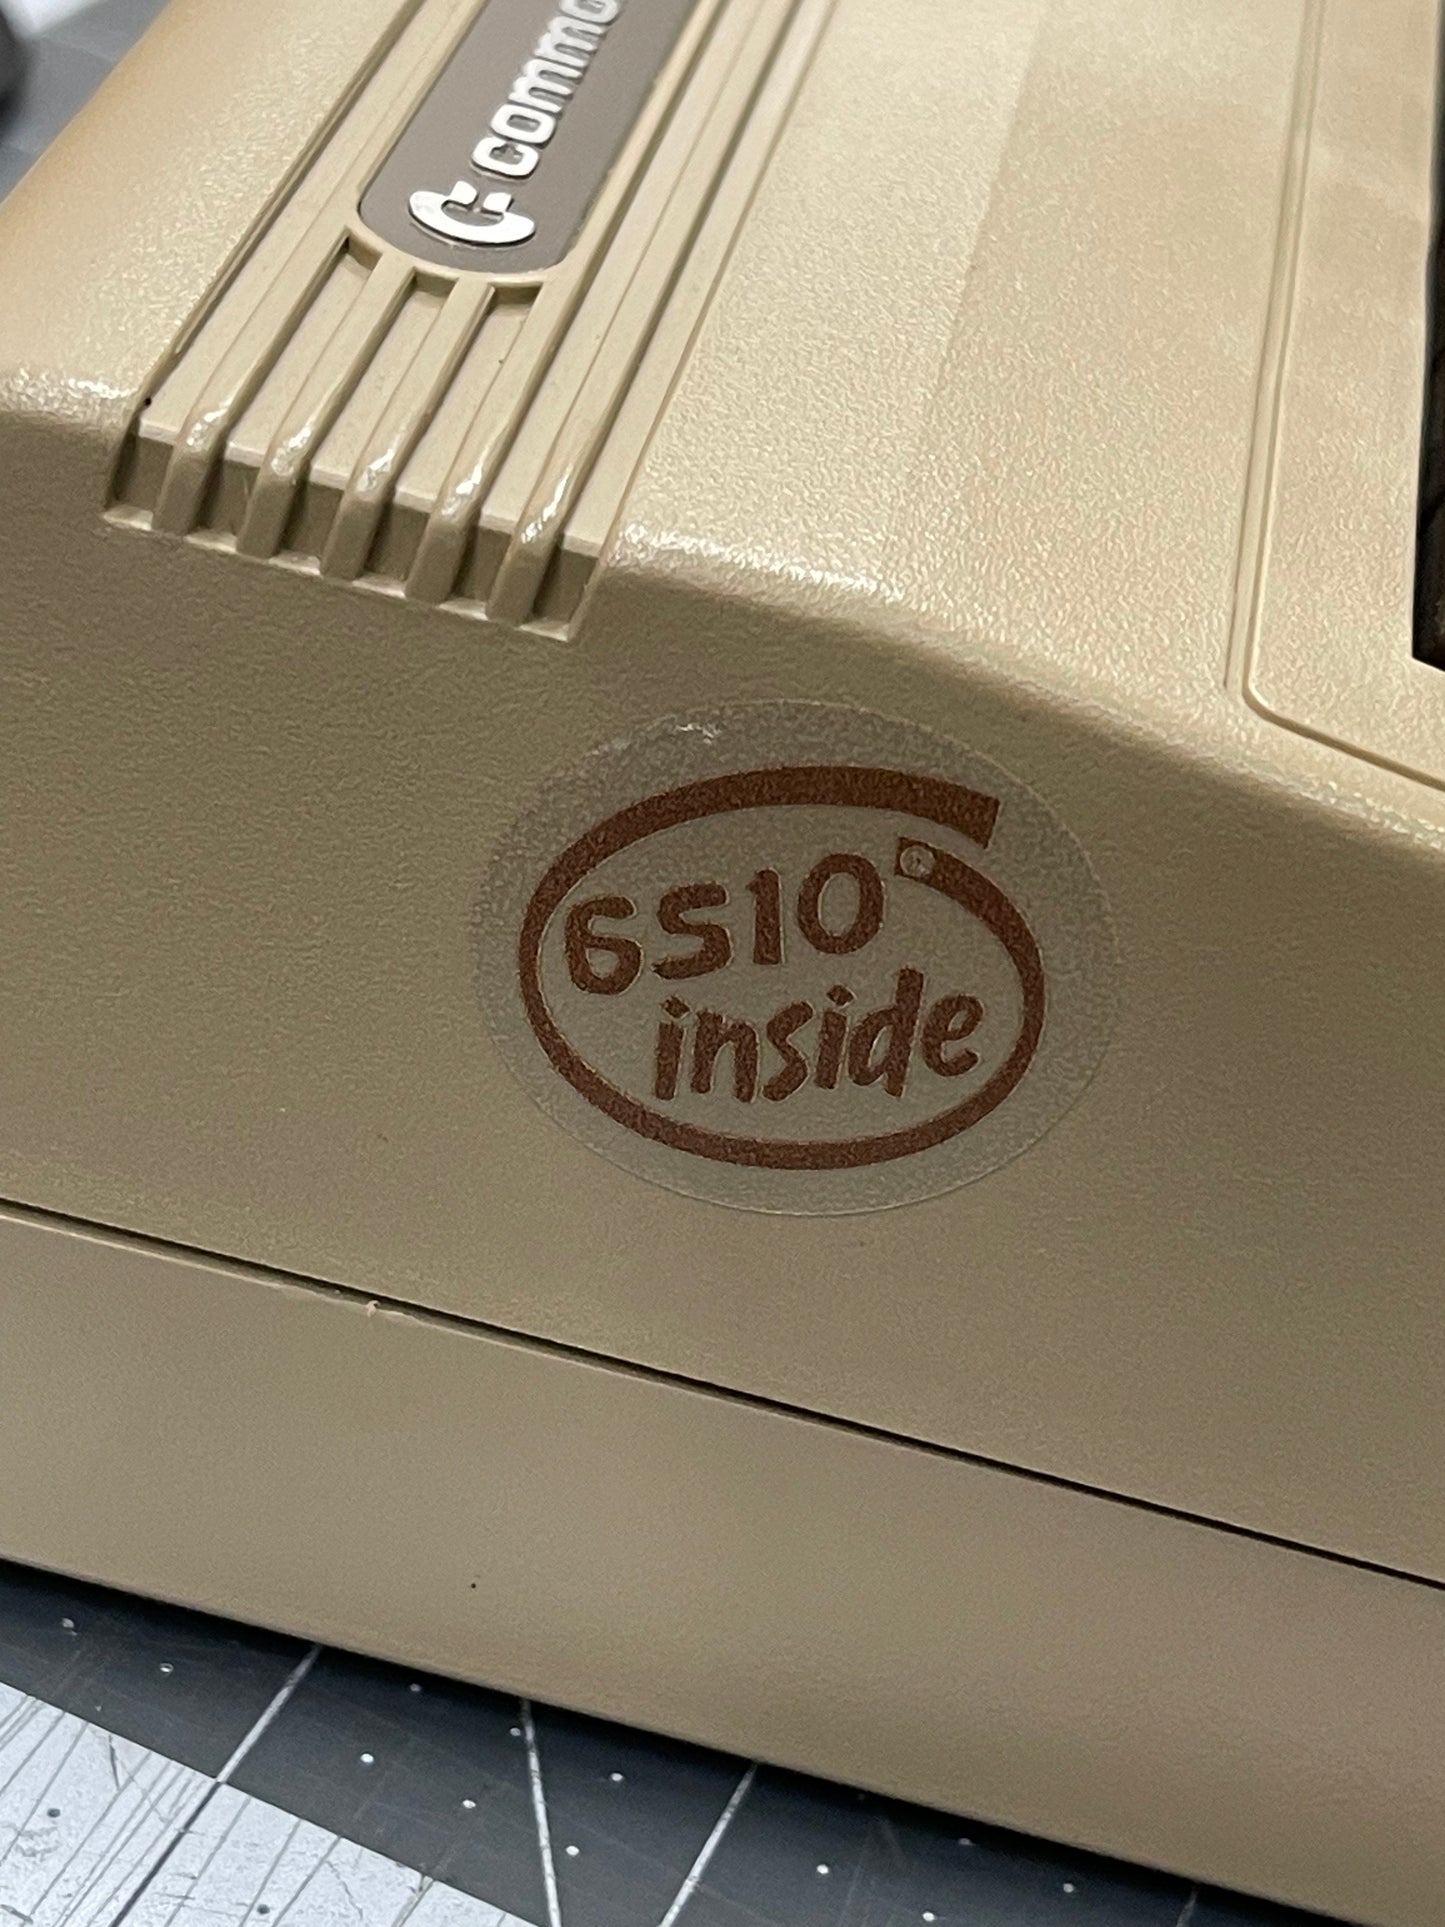 “6510 inside” MOS Commodore 64 C64 Case Badge Sticker - Clear